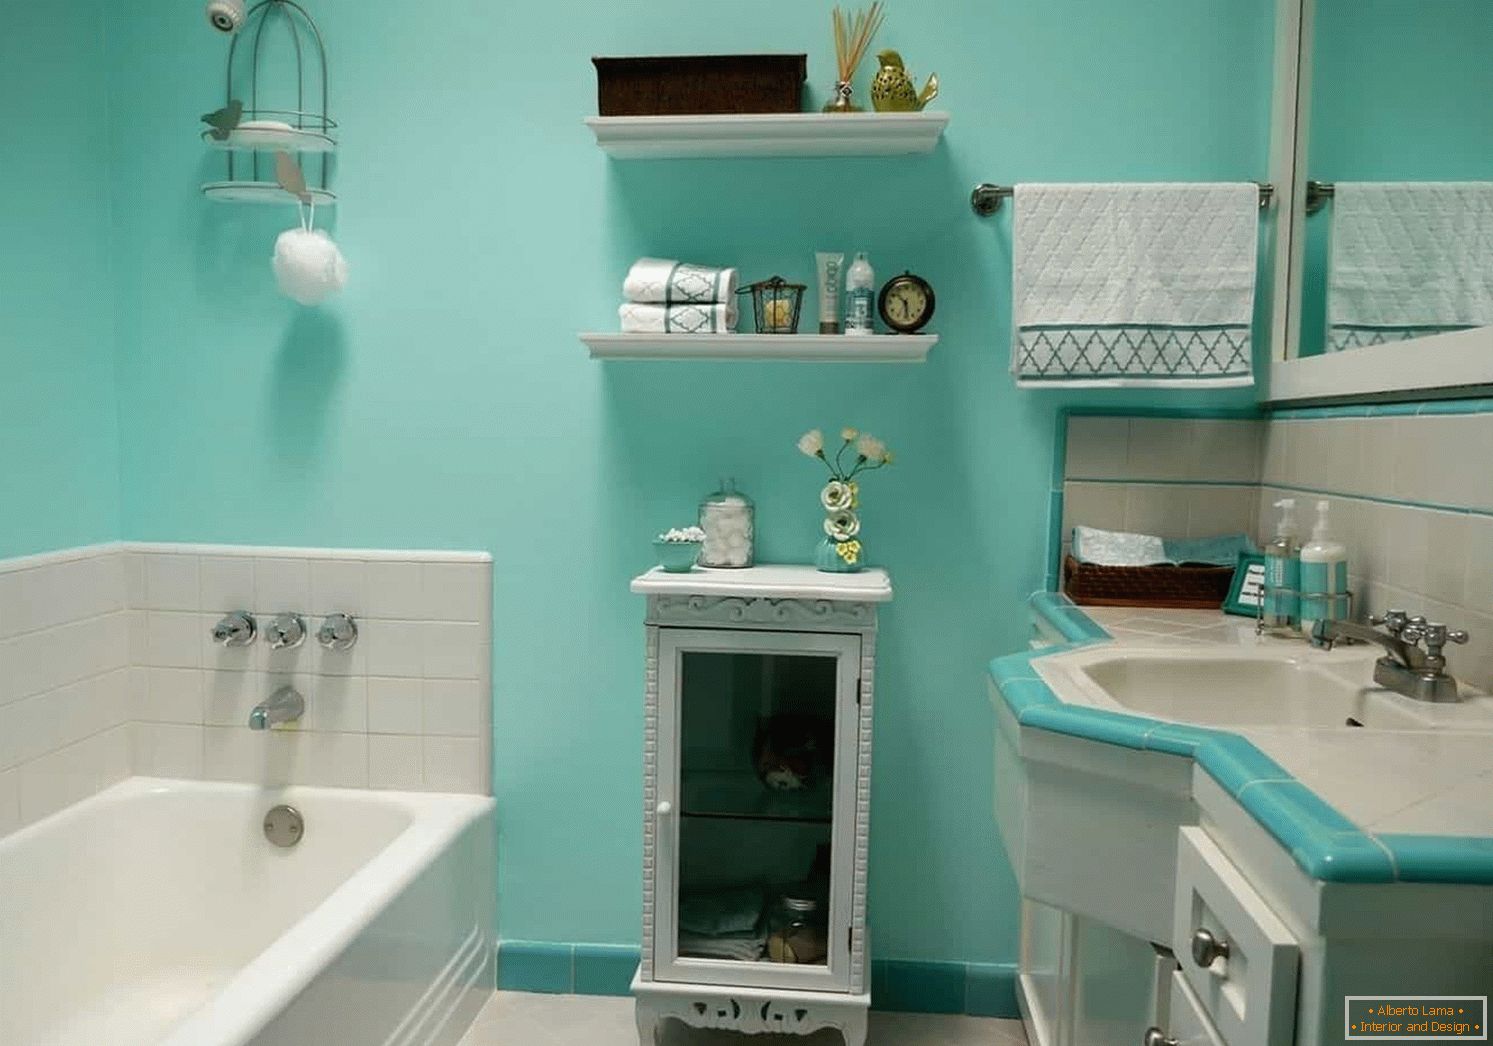 Turquoise color in the bathroom interior